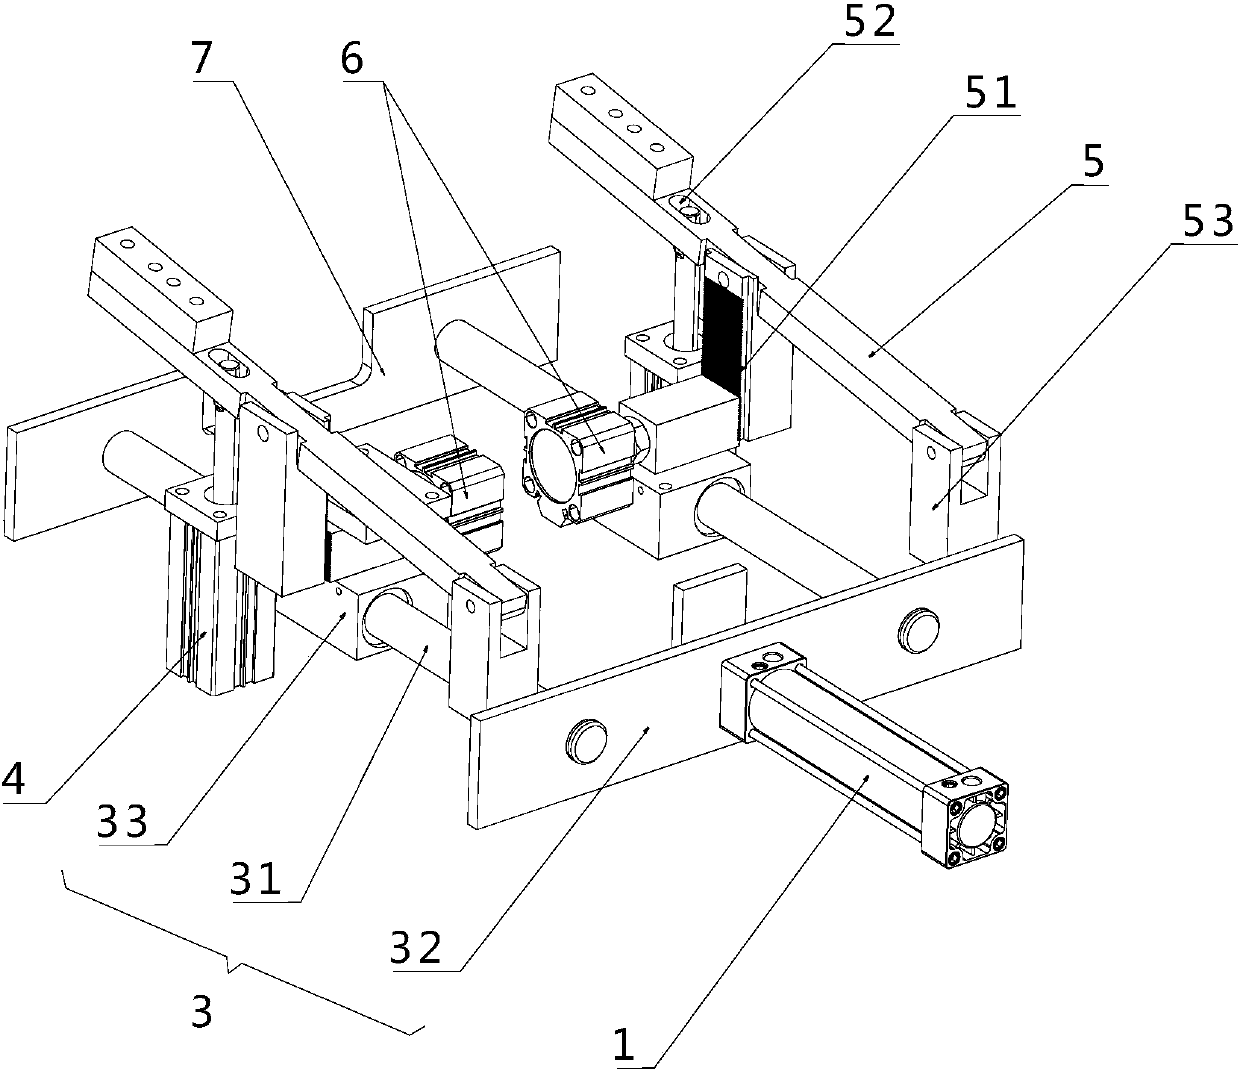 Bidirectional battery compartment limiting device